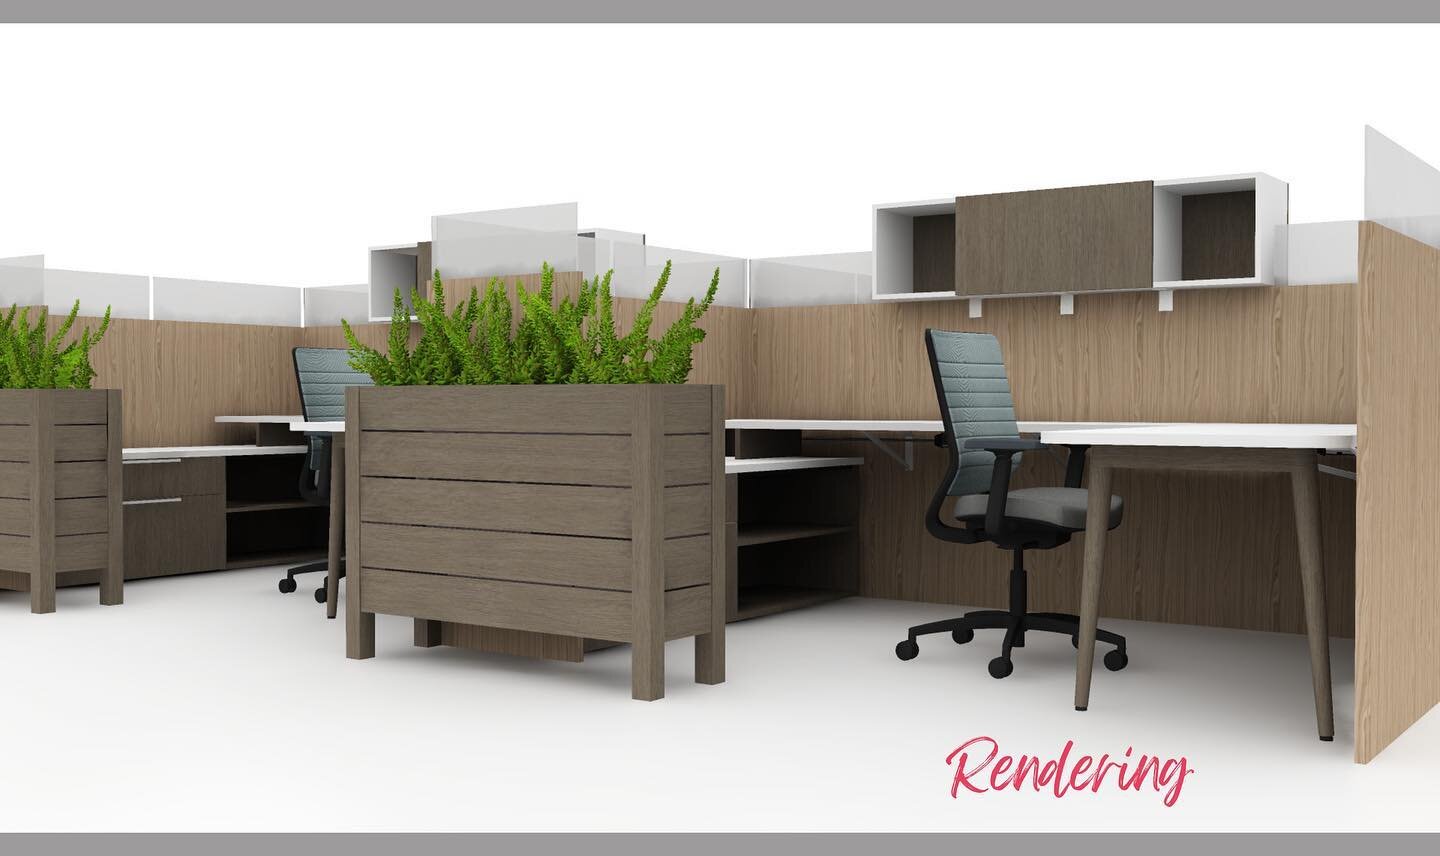 Achieving success starts with a space that inspires creativity and productivity. Here's to turning dreams into reality. #RenderingToReality
 
Project: Scottsdale Technology Company
Architecture Firm: @coxjames_architects 
Dealer: Furniture Resource &